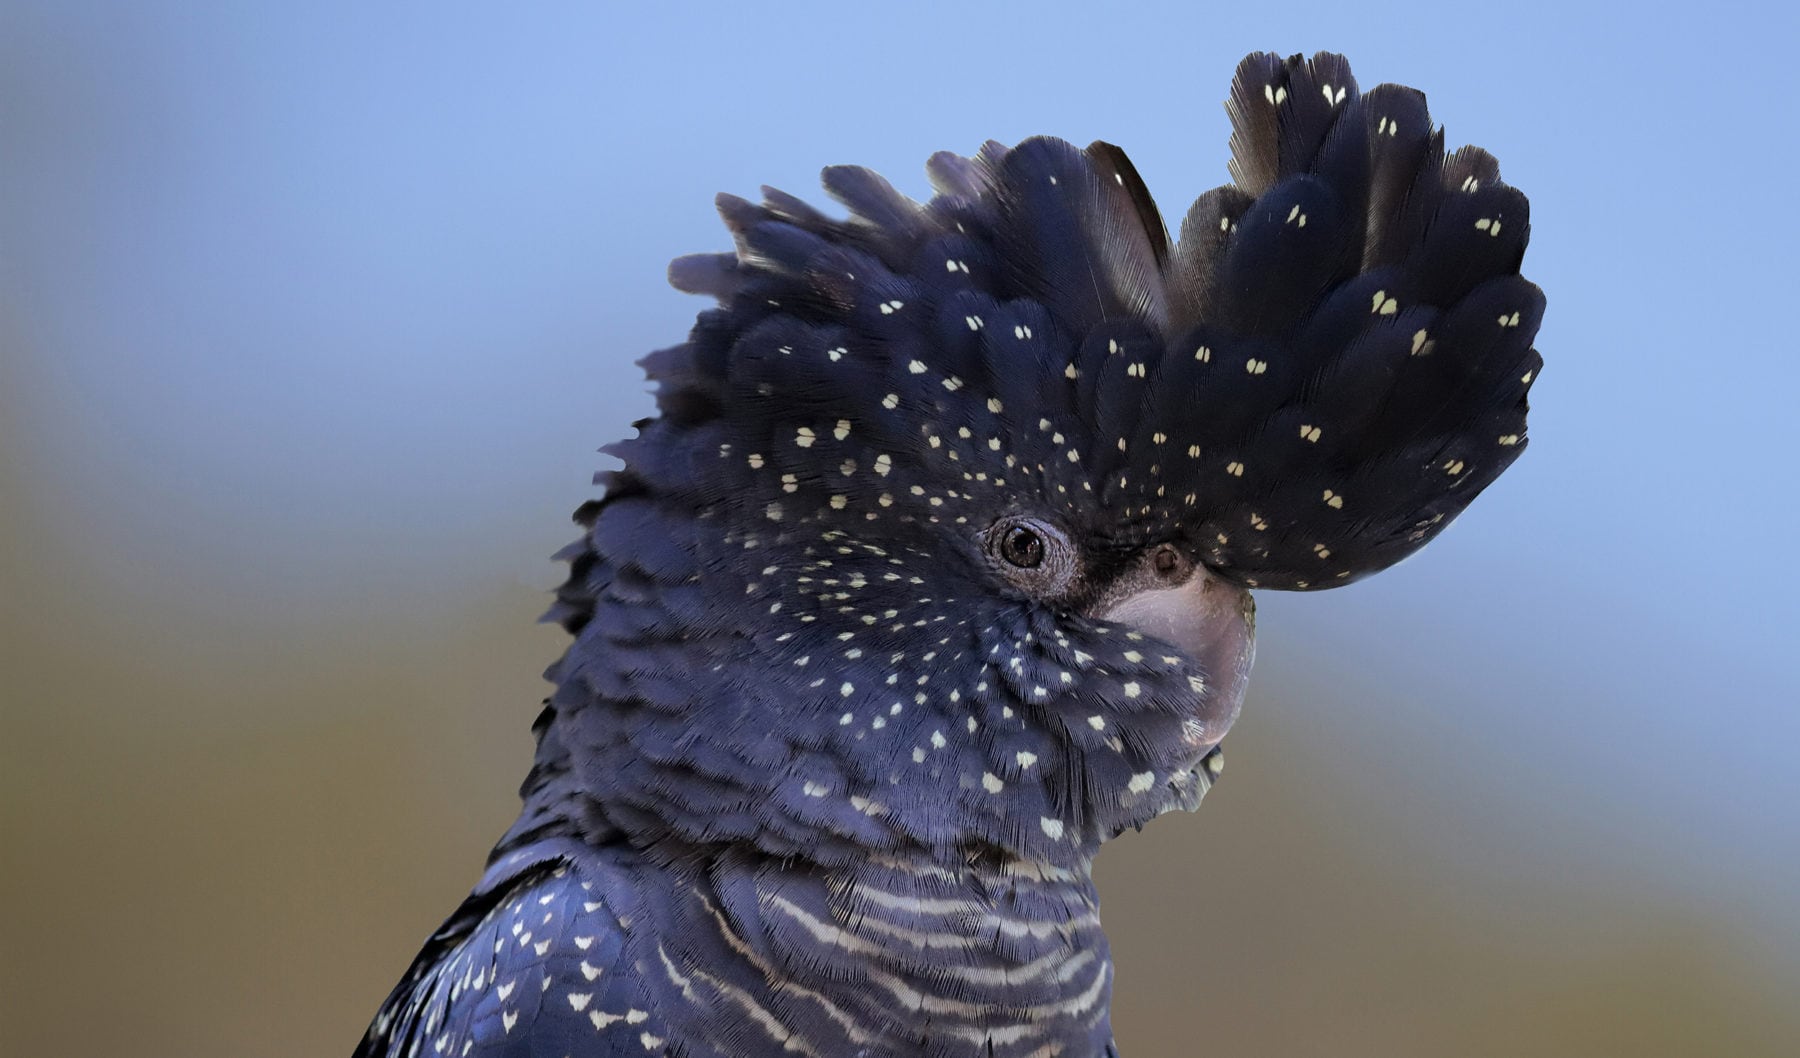 of red-tailed black cockatoo discovered - Australian Geographic